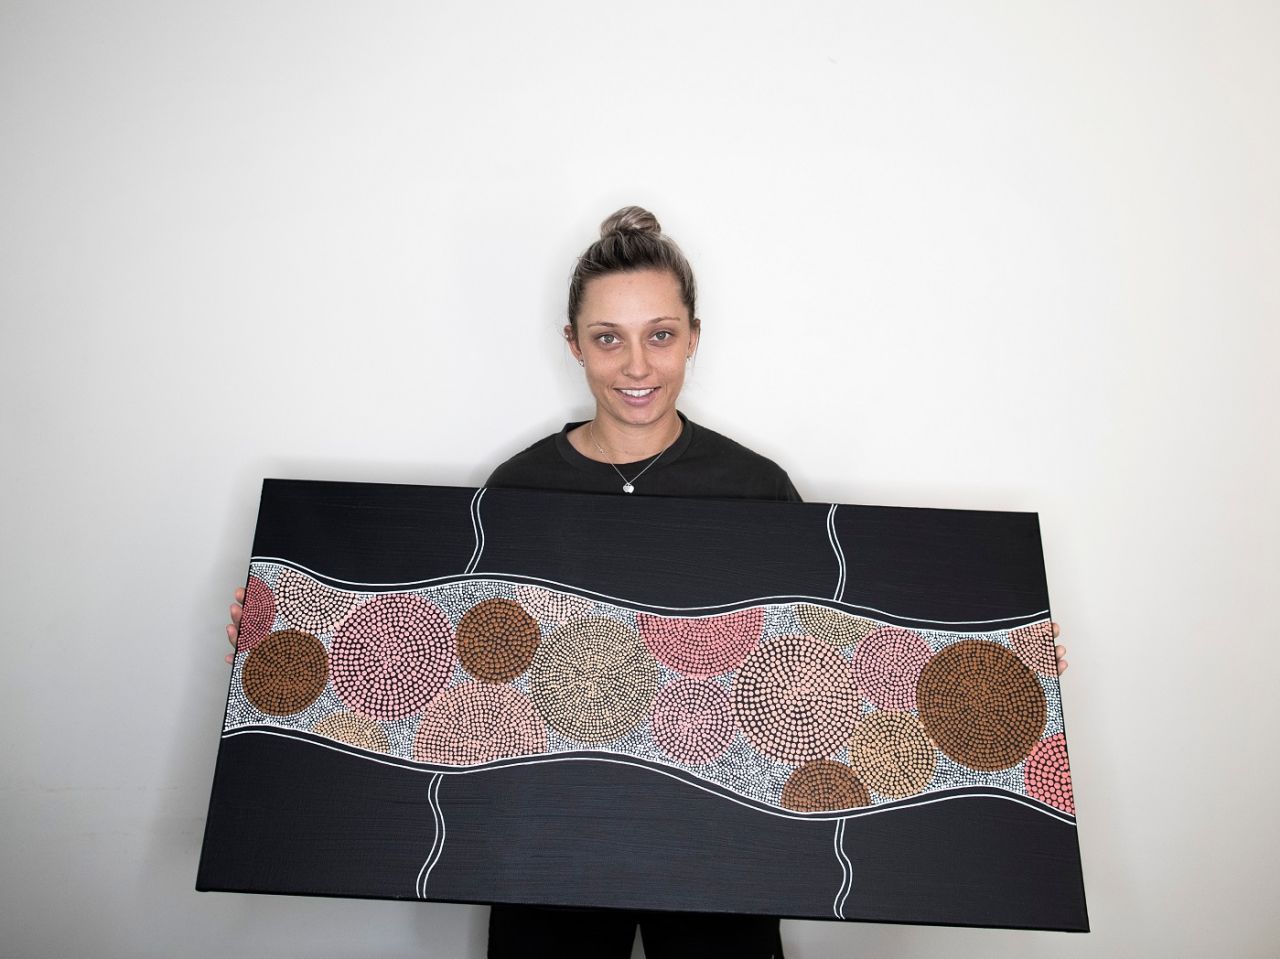 Ashleigh Gardner poses with her painting, Sydney, May 8, 2020